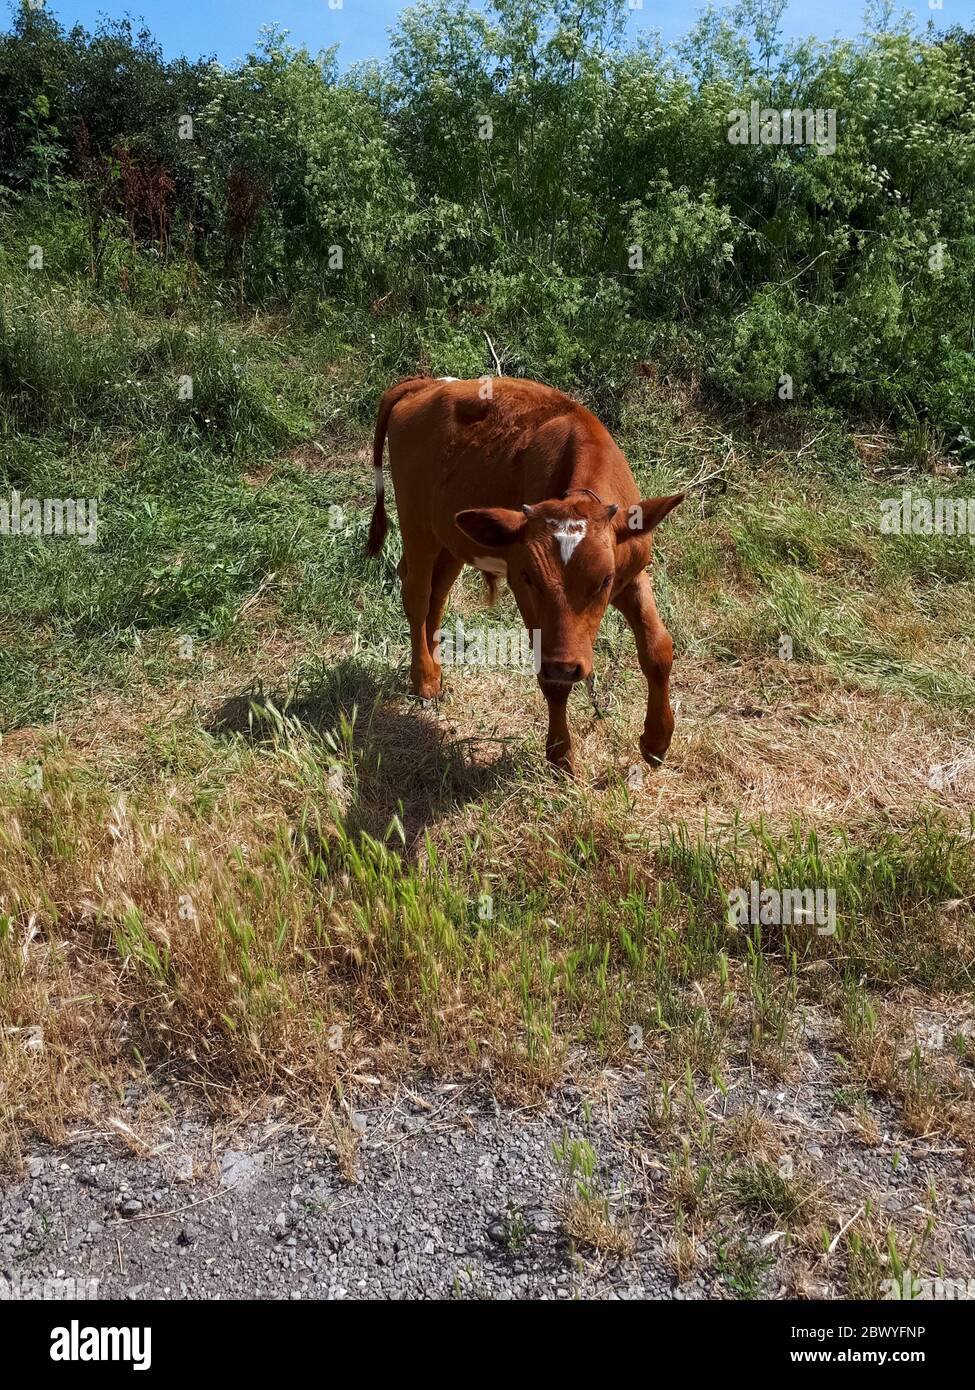 The calf grazes on the grass. cow cub. Stock Photo